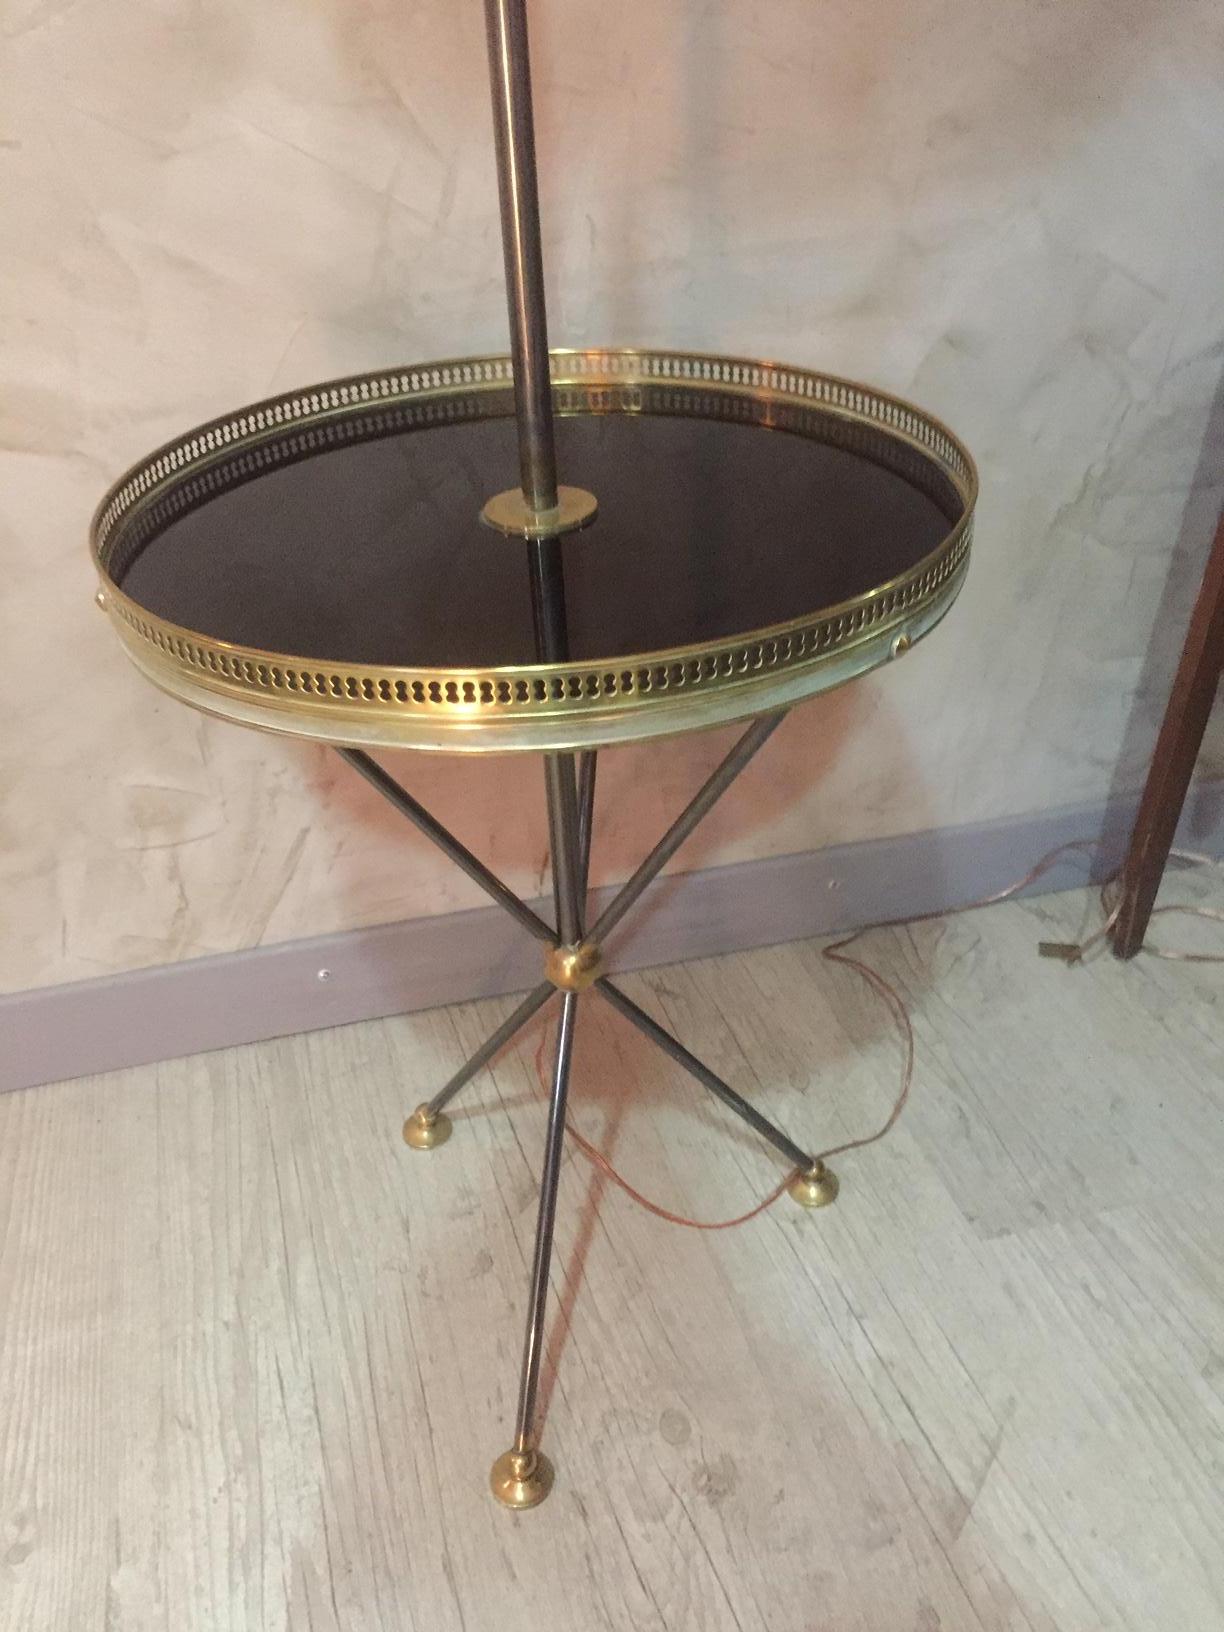 Beautiful 20th century, French gilded brass floor lamp from the 1950s. 
Small table integrated in the floor lamp. With a brass gallery. 
Tripod base. Very large lampshade.